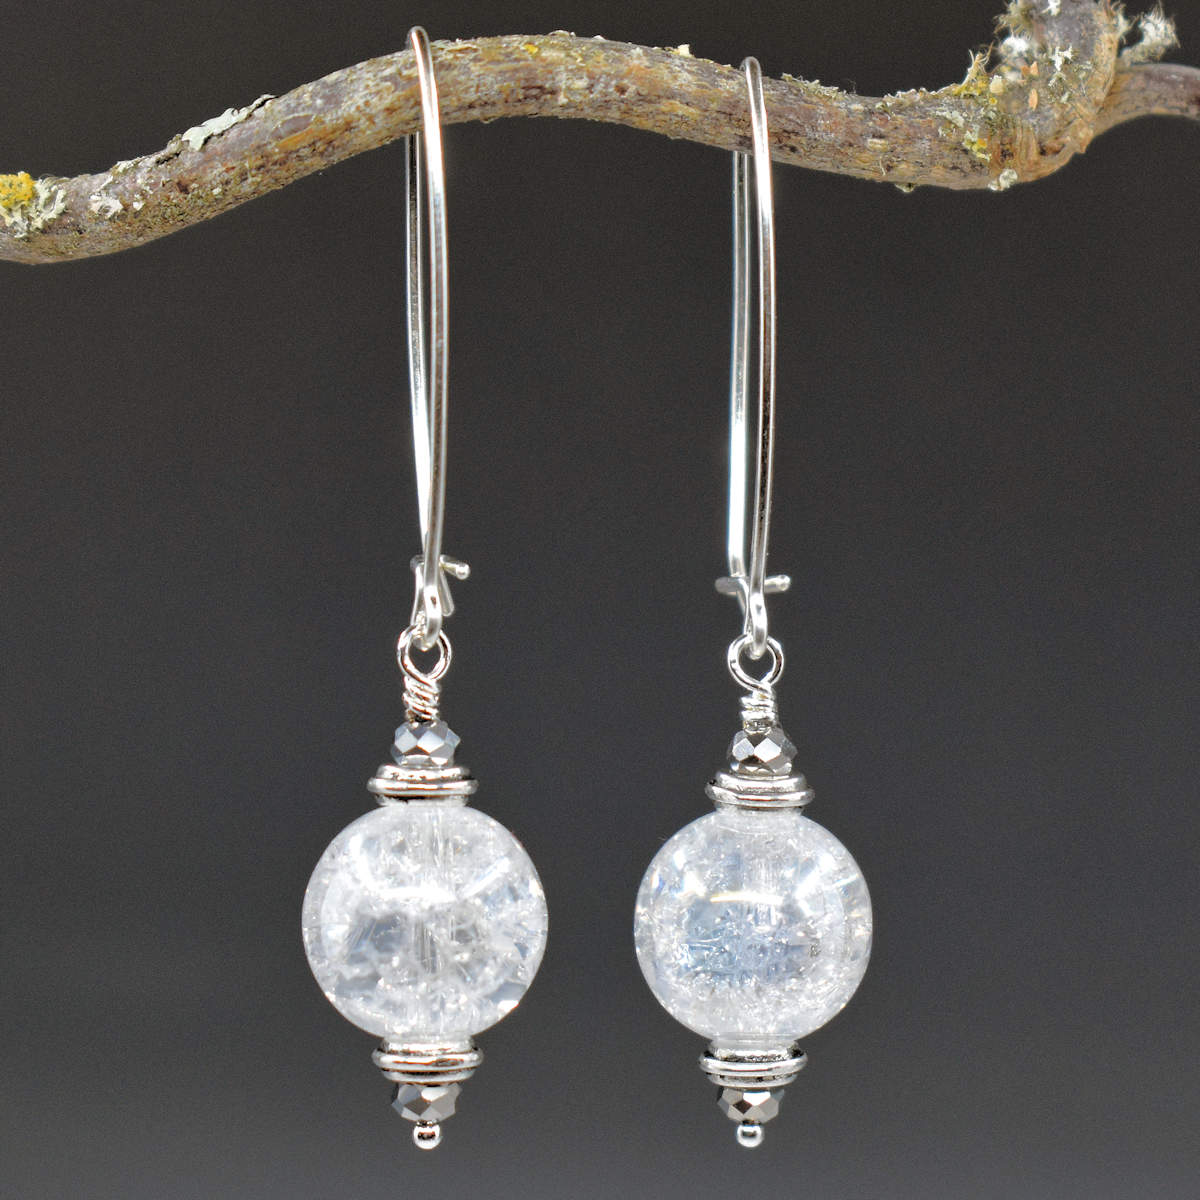 A pair of earrings hang from a twisty branch against a gray background. The earrings have long silver oval wires that latch and dangles made from shiny crackled glass balls with sparkly silver accents on the top and bottom.